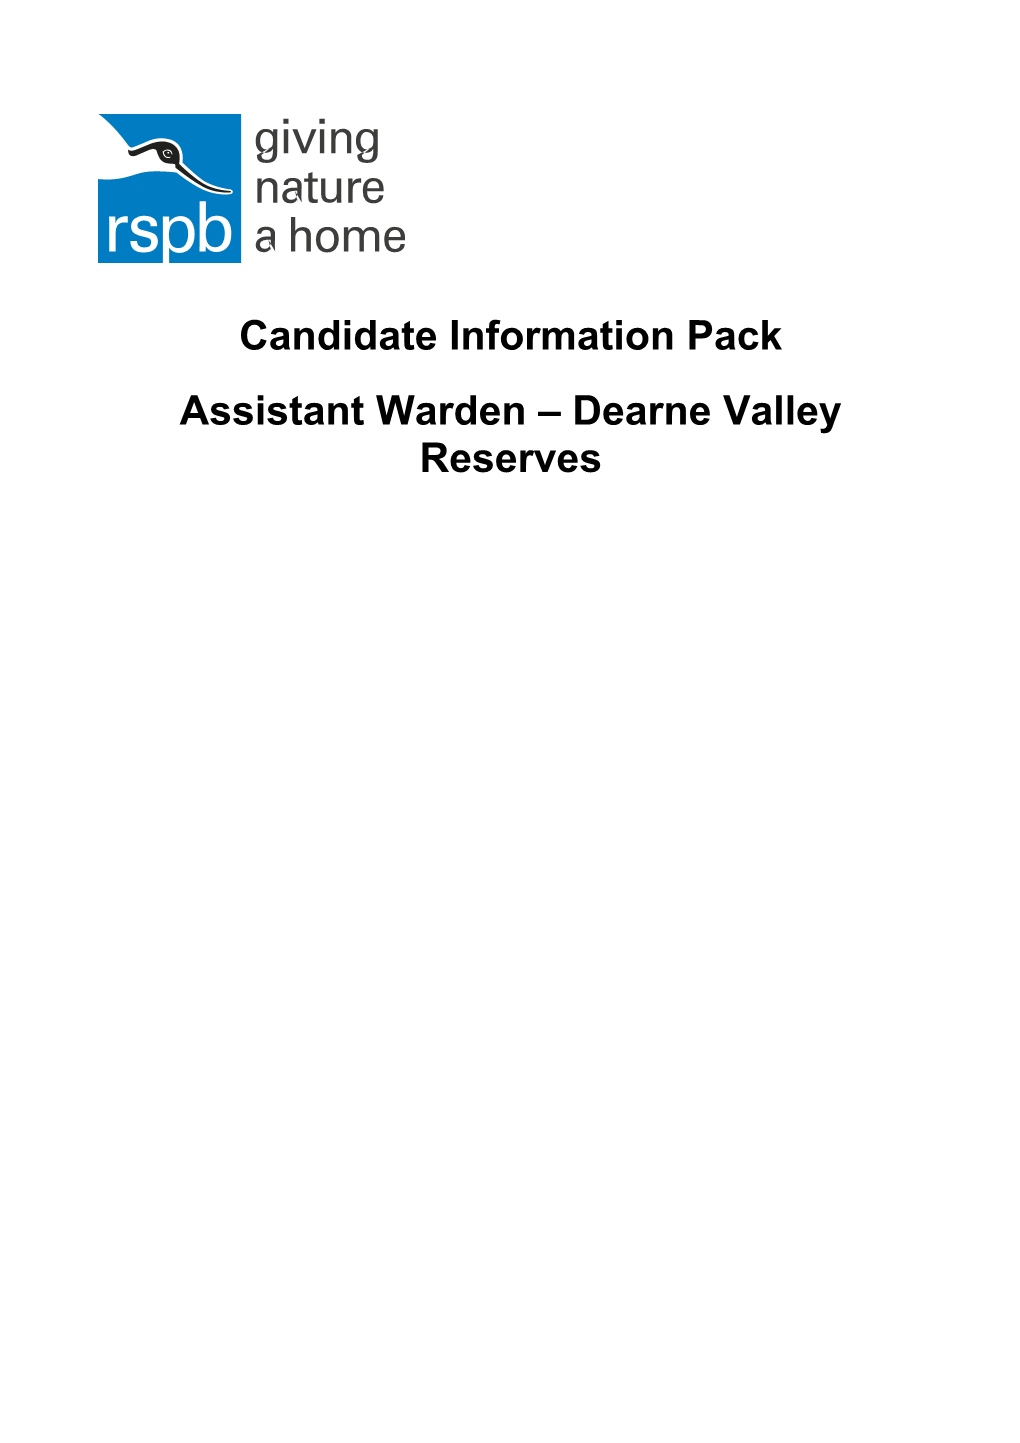 Assistant Warden Dearne Valley Reserves